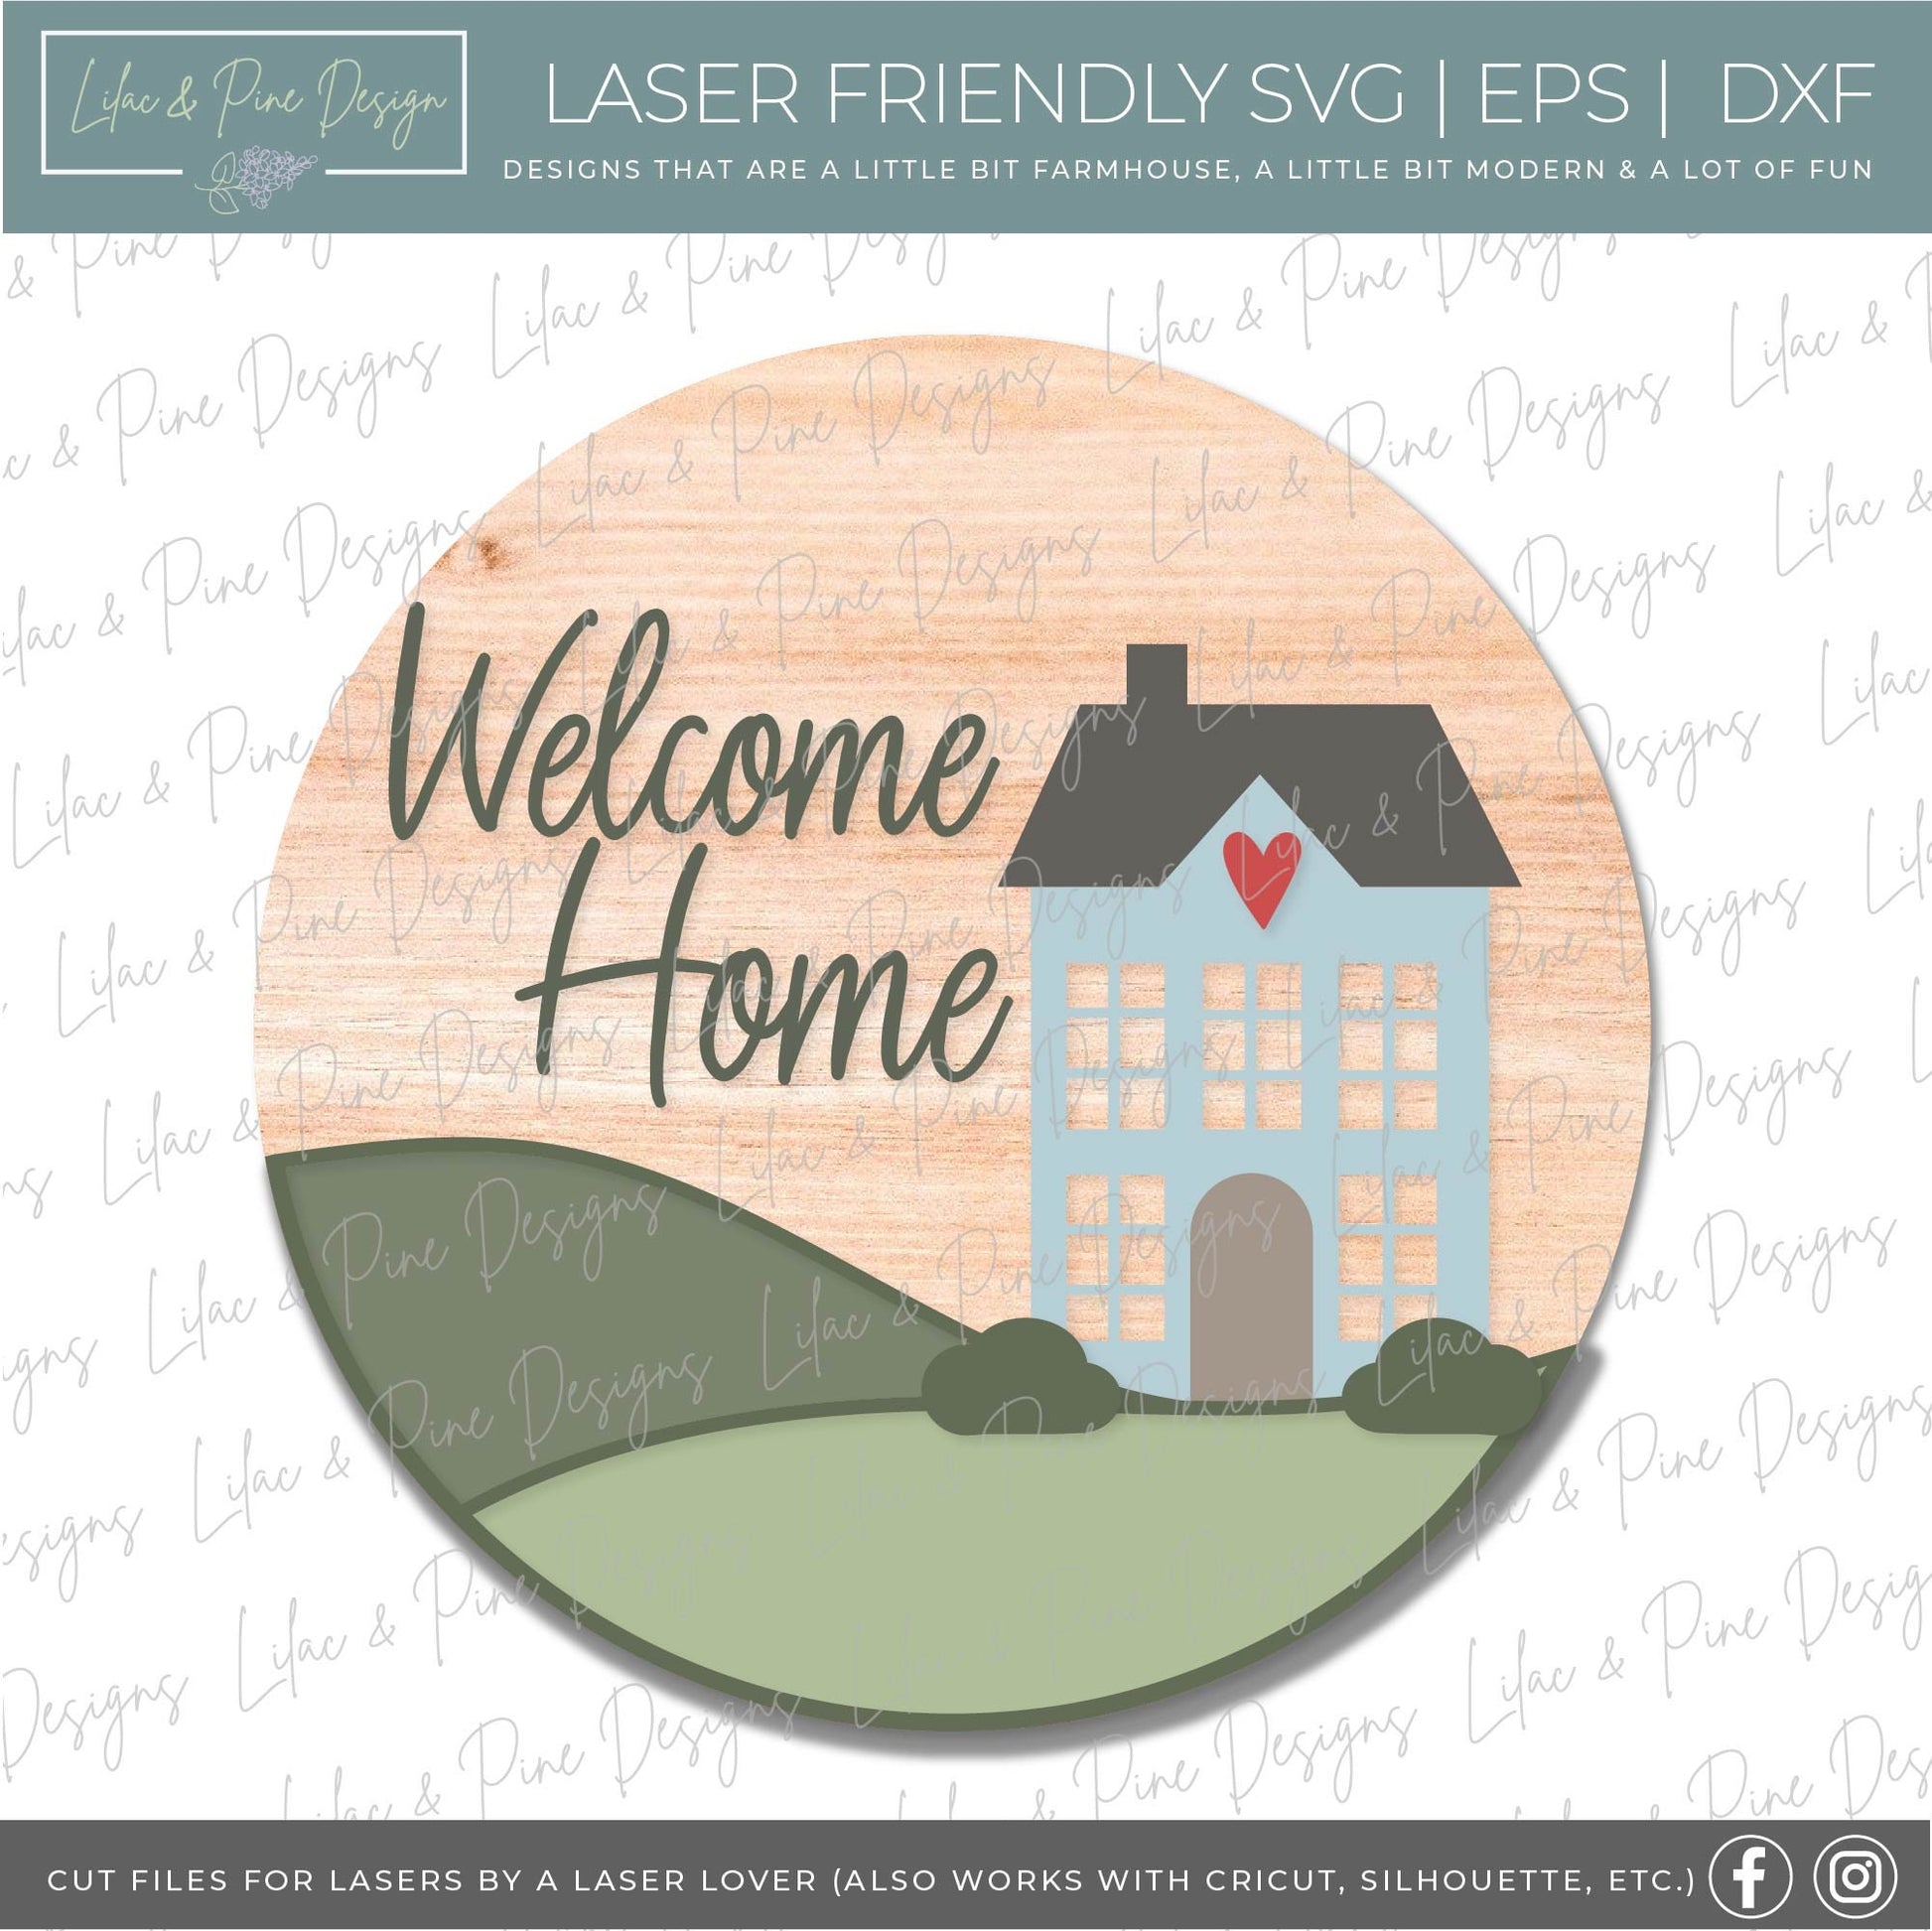 Home is Where Mom is door hanger SVG, Mother's Day round sign, Welcome Home porch sign SVG, Mum svg, Mama SVG, Glowforge Svg, laser cut file